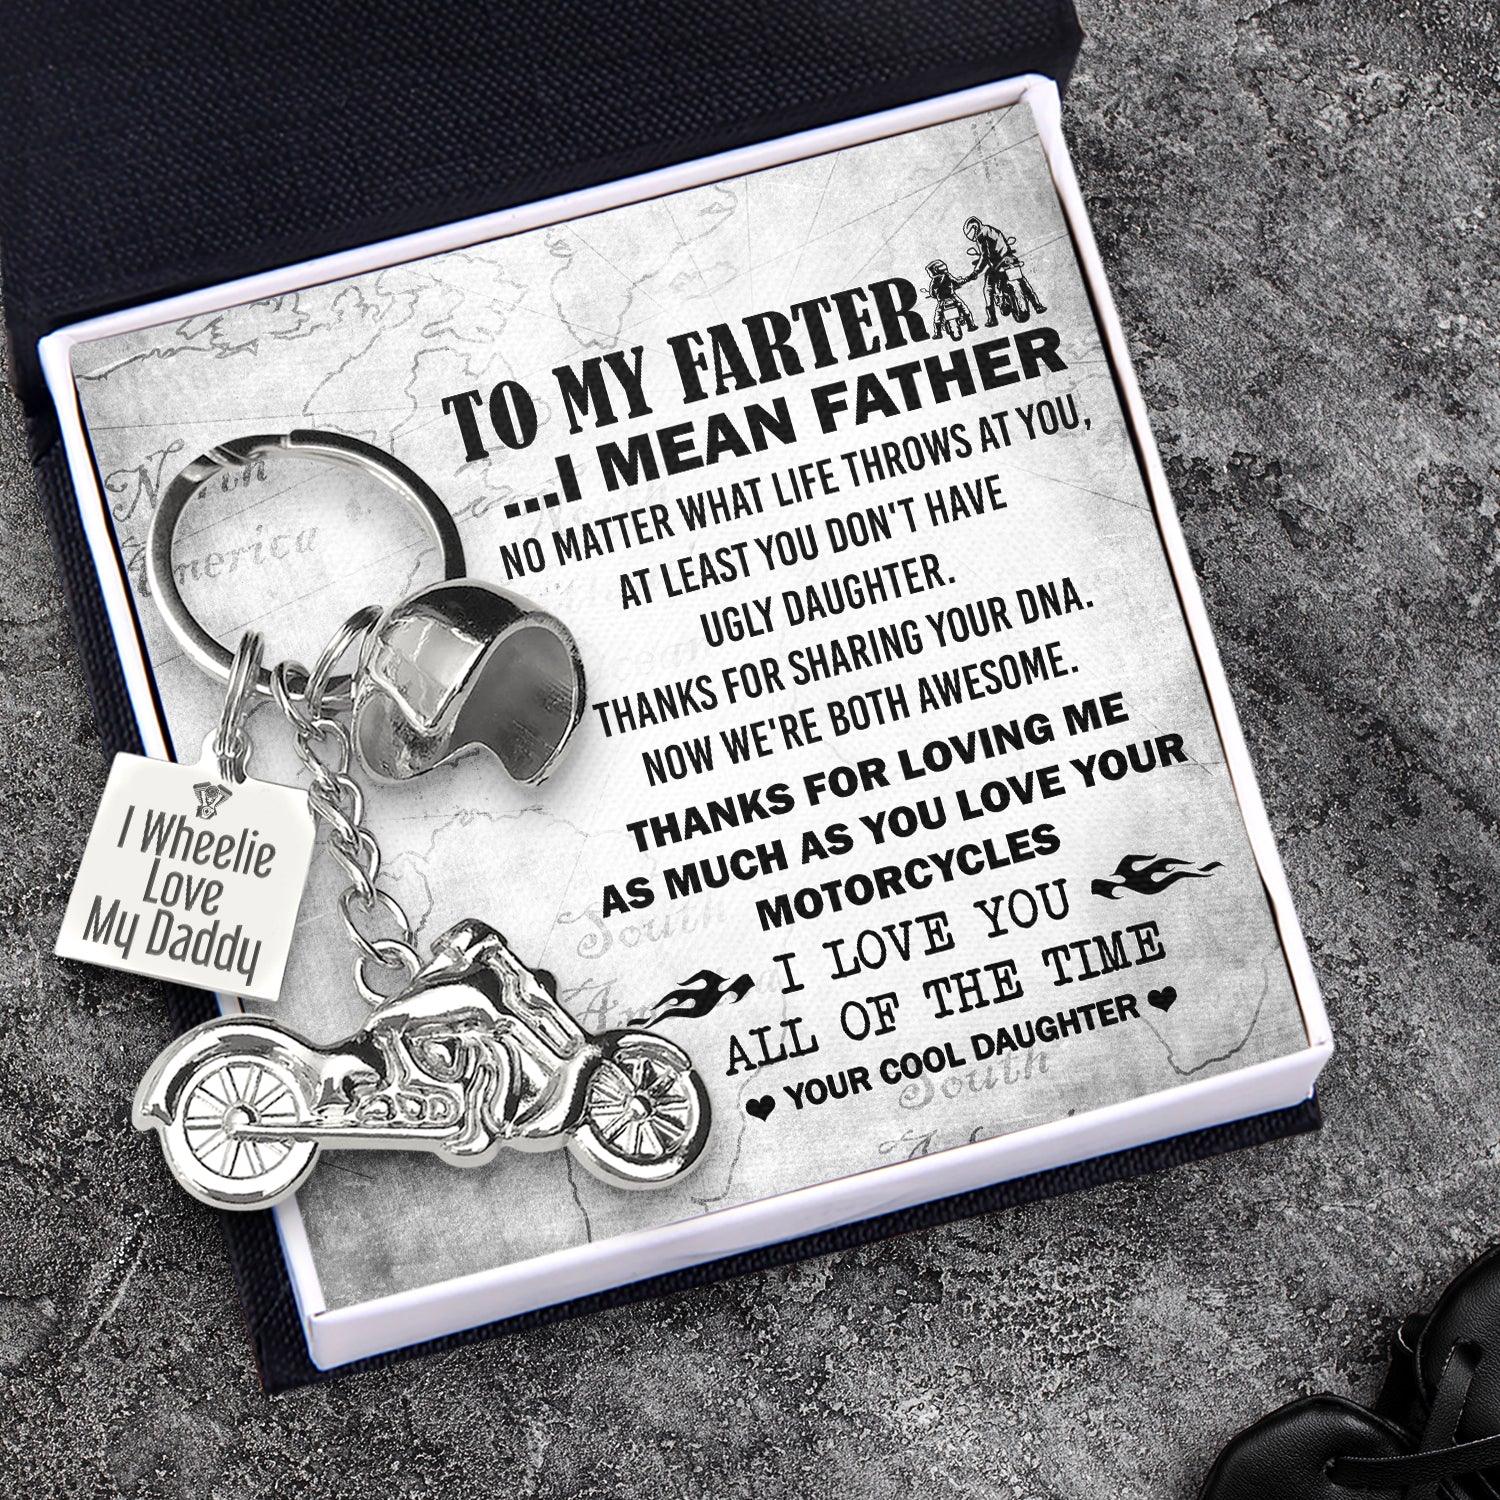 Classic Bike Keychain - Biker - To My Father - From Daughter - I Love You All Of The Time - Augkt18004 - Gifts Holder